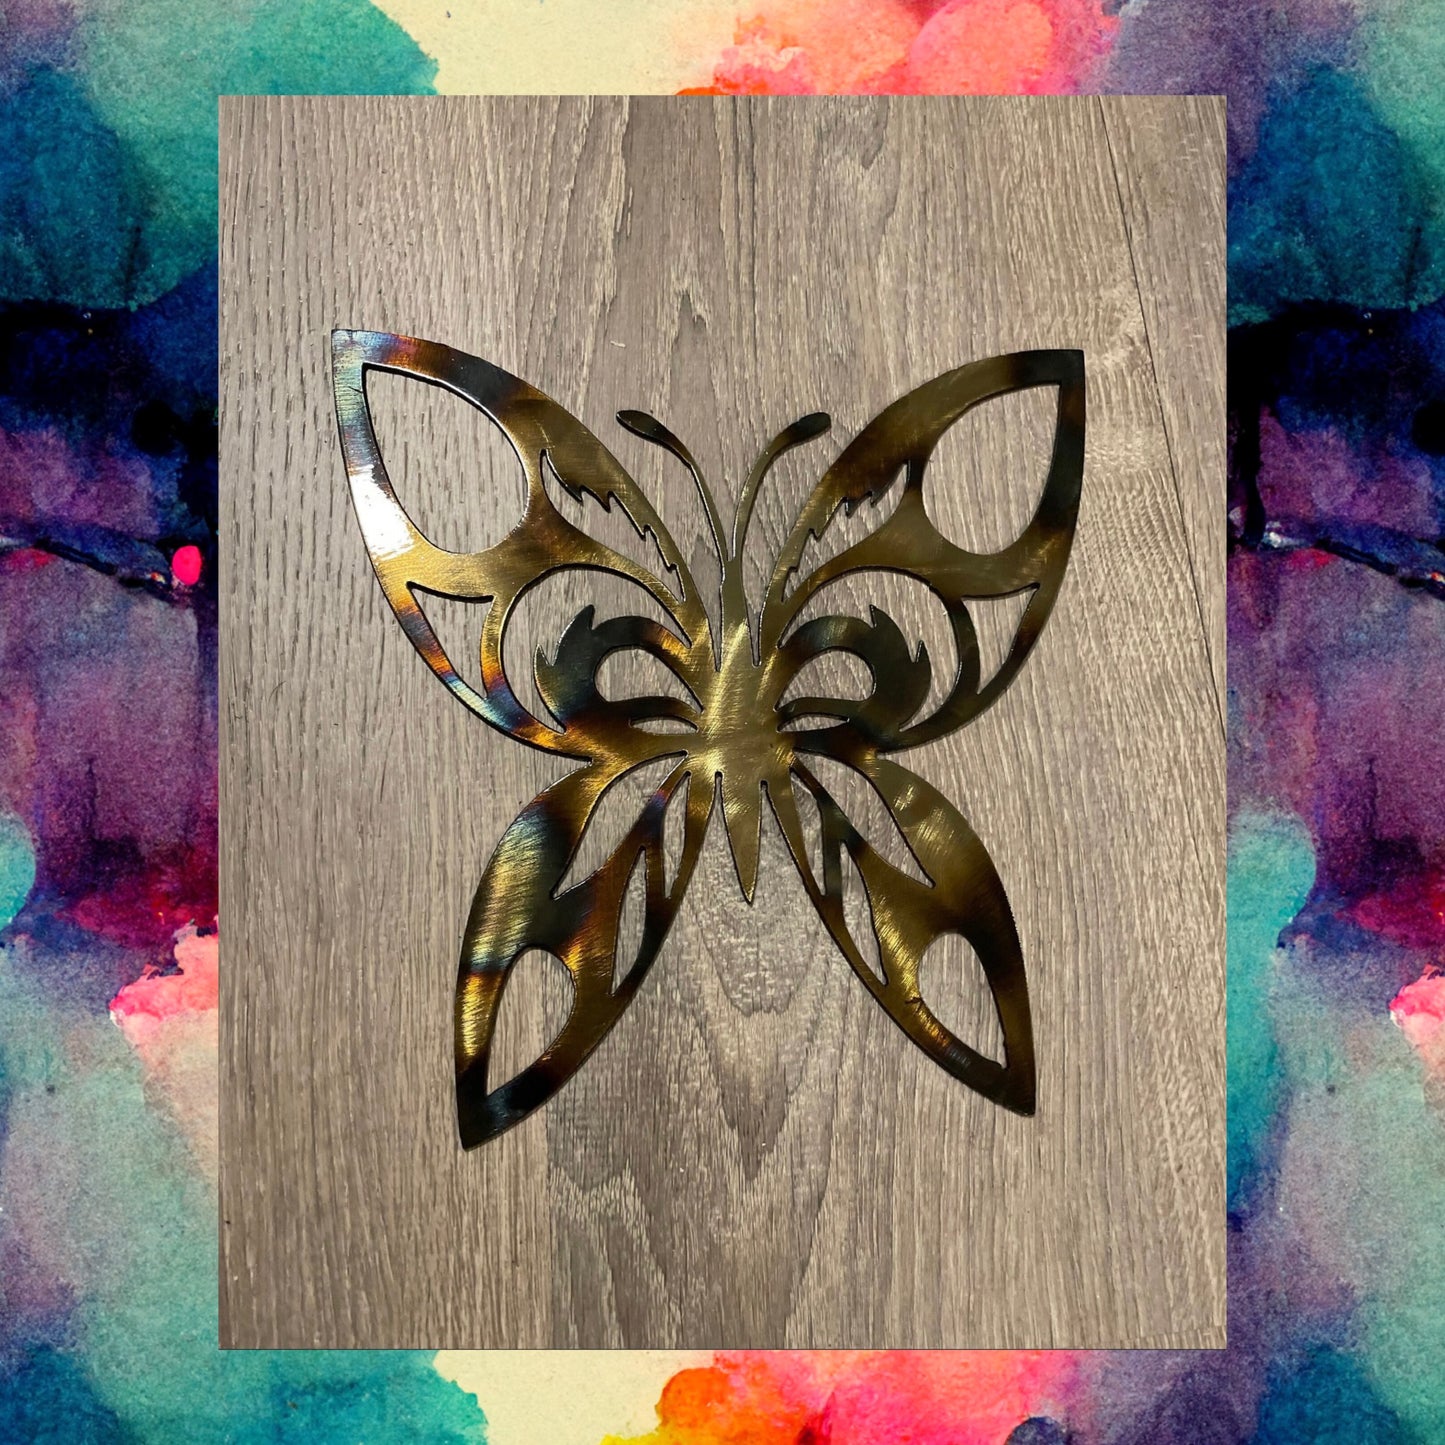 Metal Art Butterfly, Metal Wall Decor, Insect